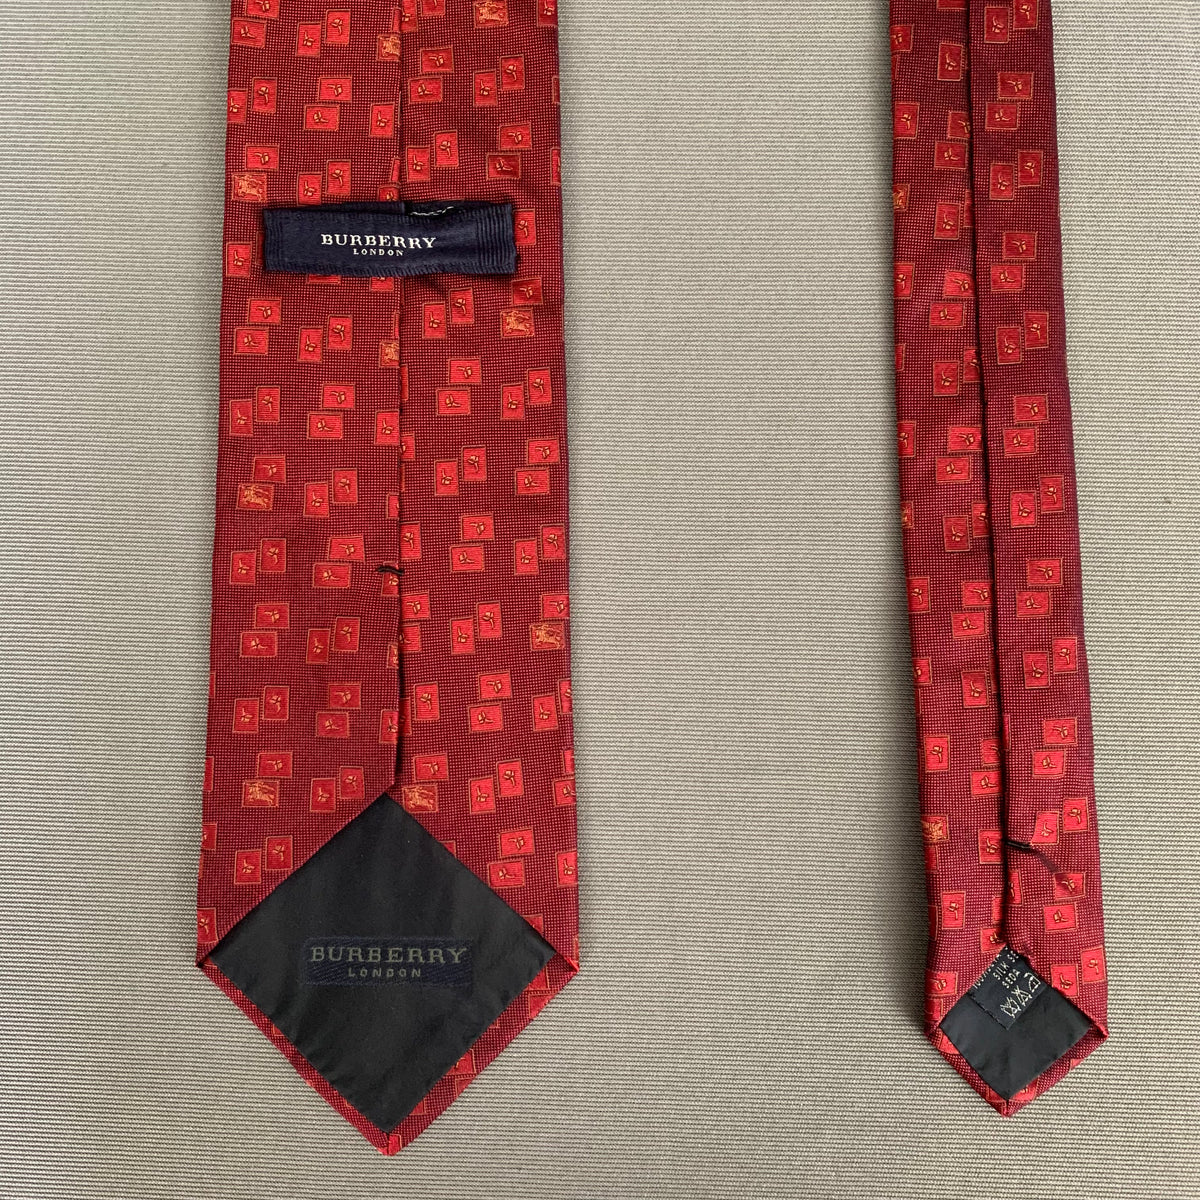 BURBERRY LONDON TIE - 100% Silk - Made in Italy - FR20604 –  